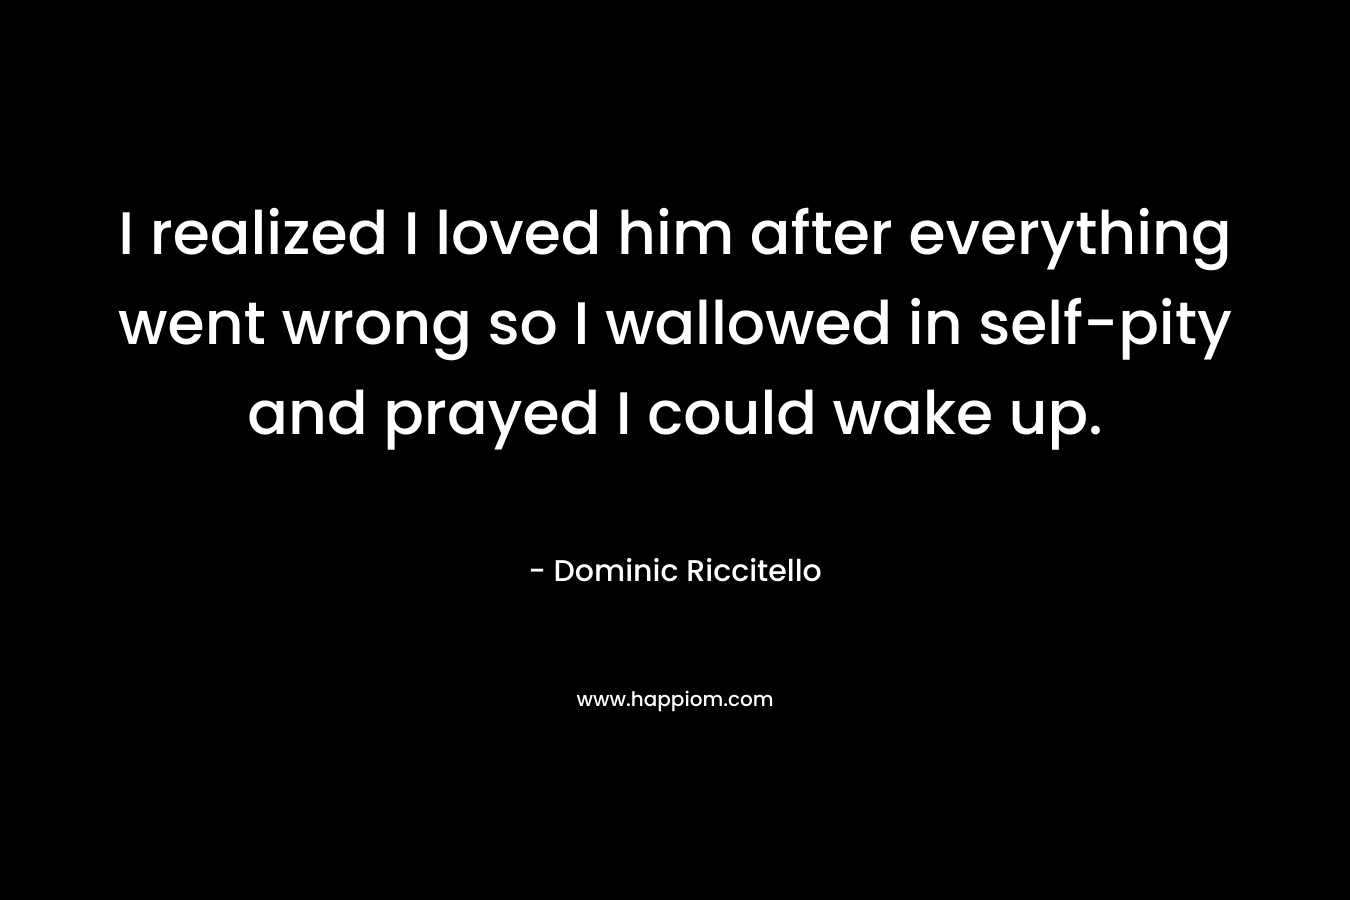 I realized I loved him after everything went wrong so I wallowed in self-pity and prayed I could wake up. – Dominic Riccitello